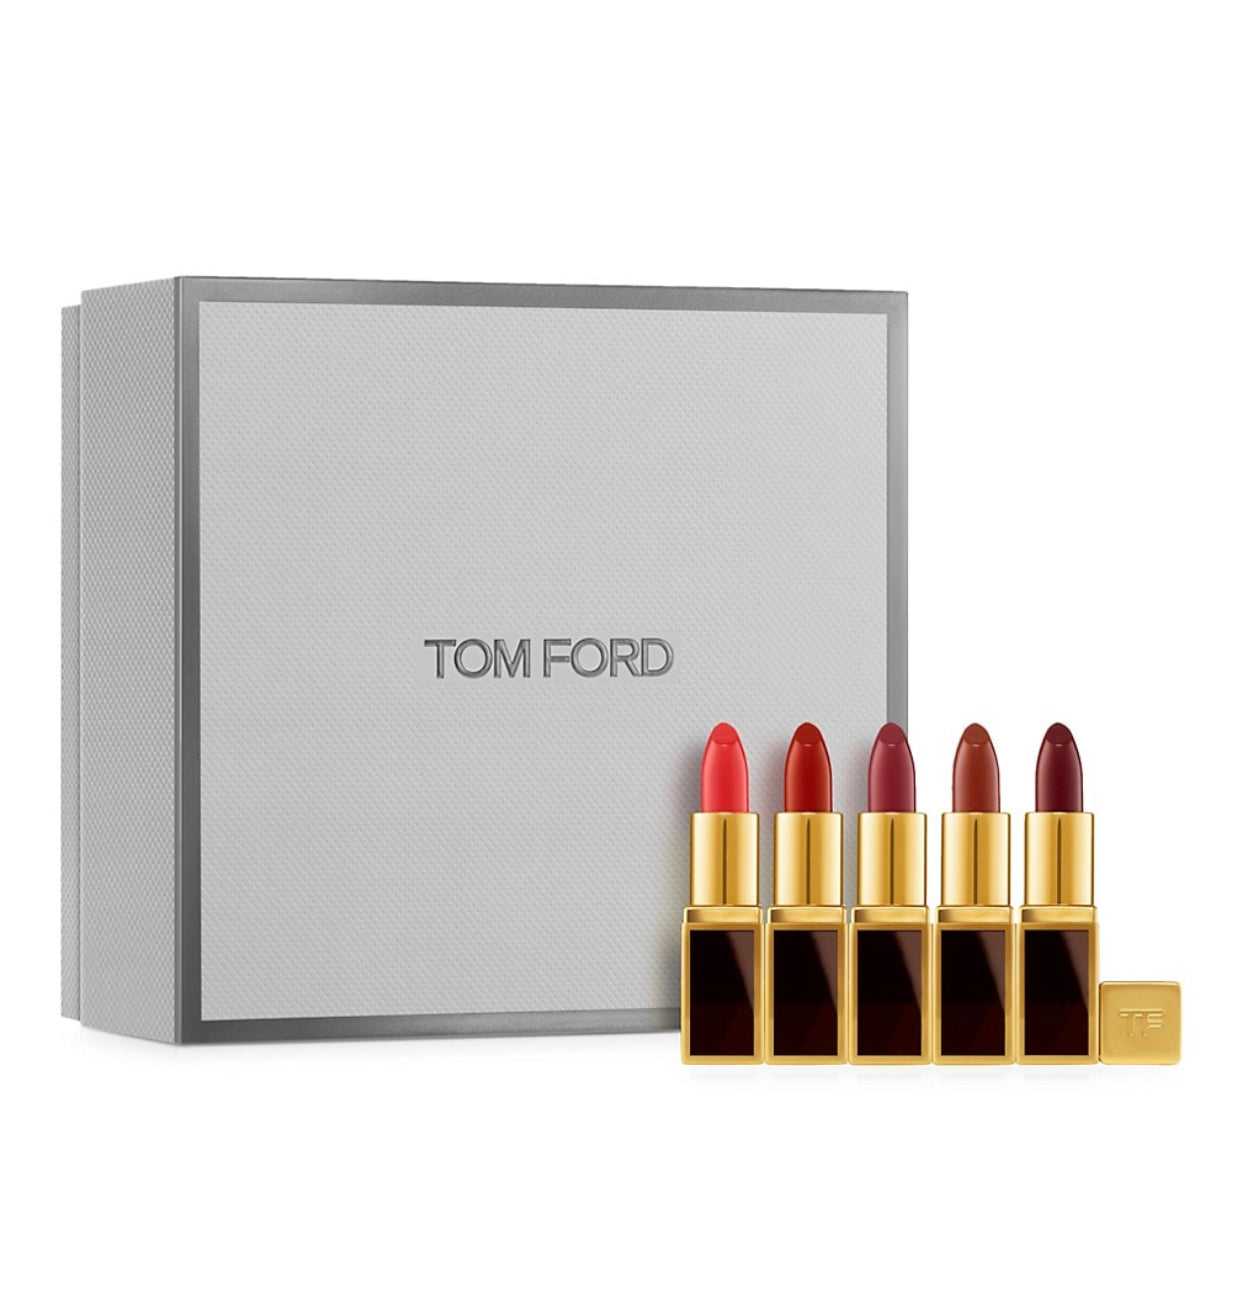 TOM FORD, LIP DISCOVERY COLLECTION